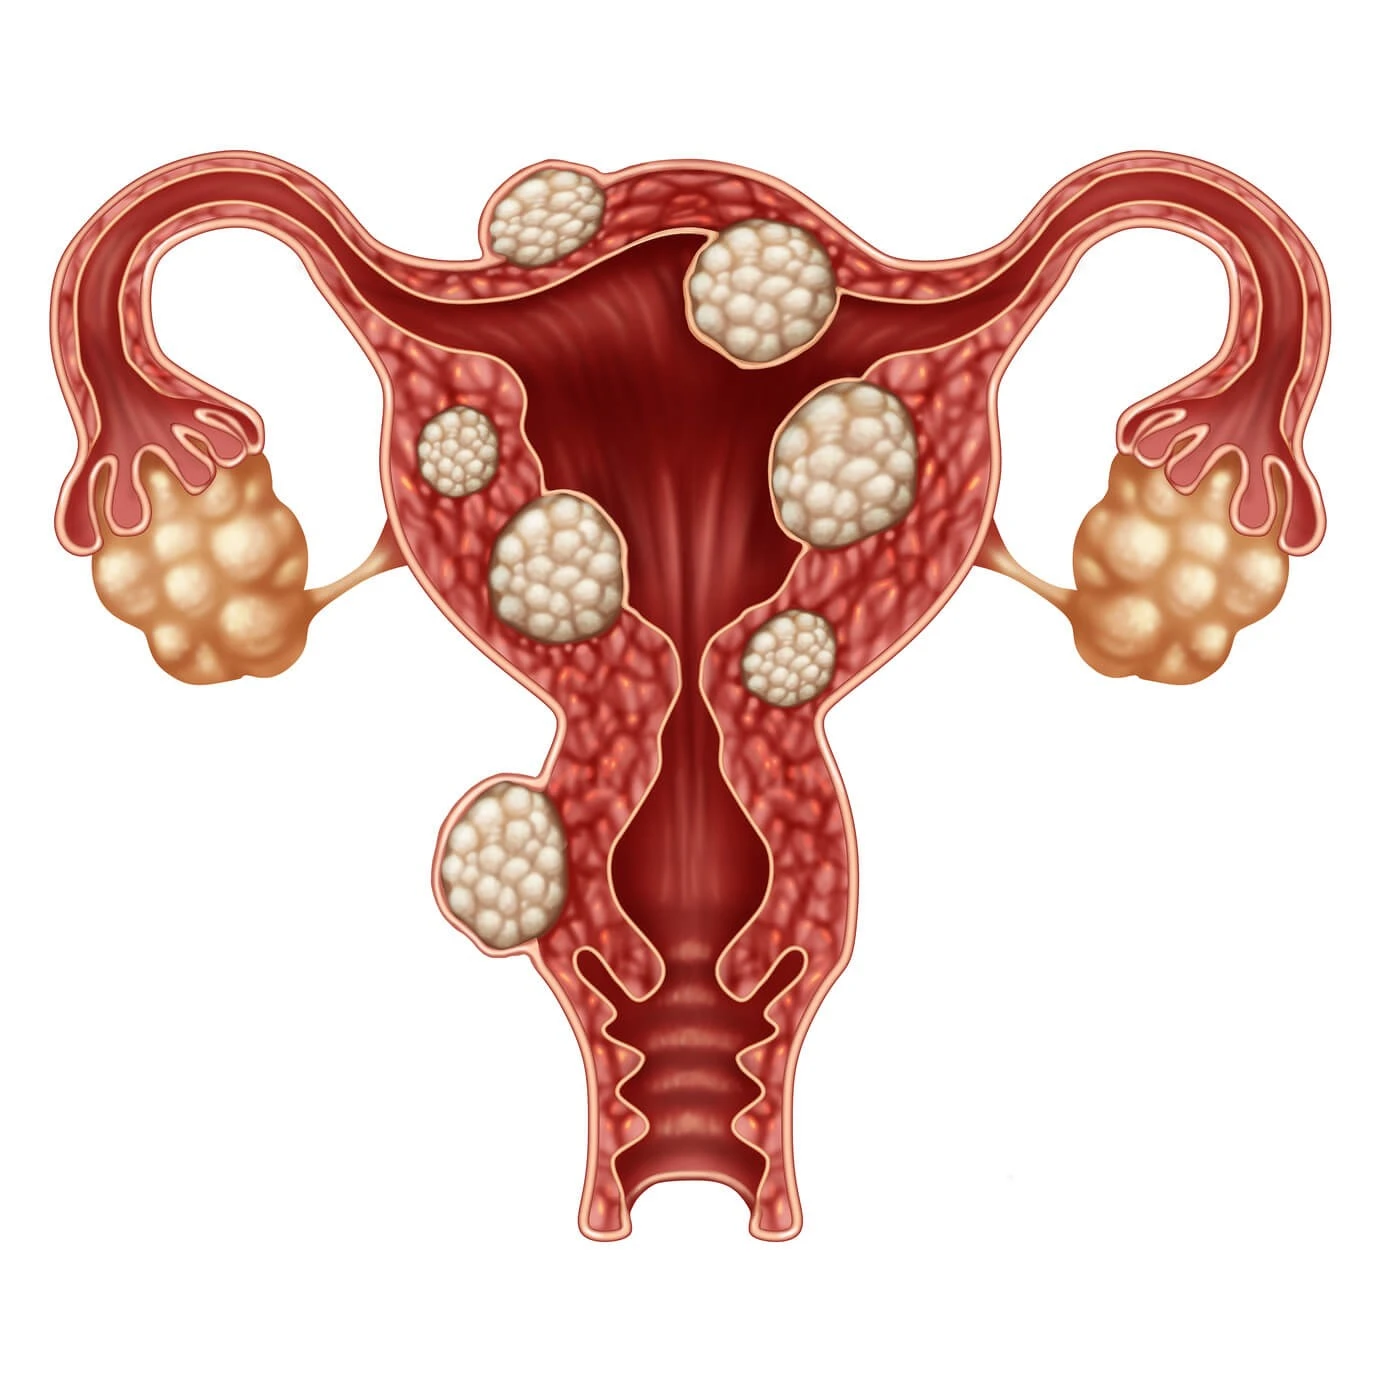 What-is-uterine-cyst